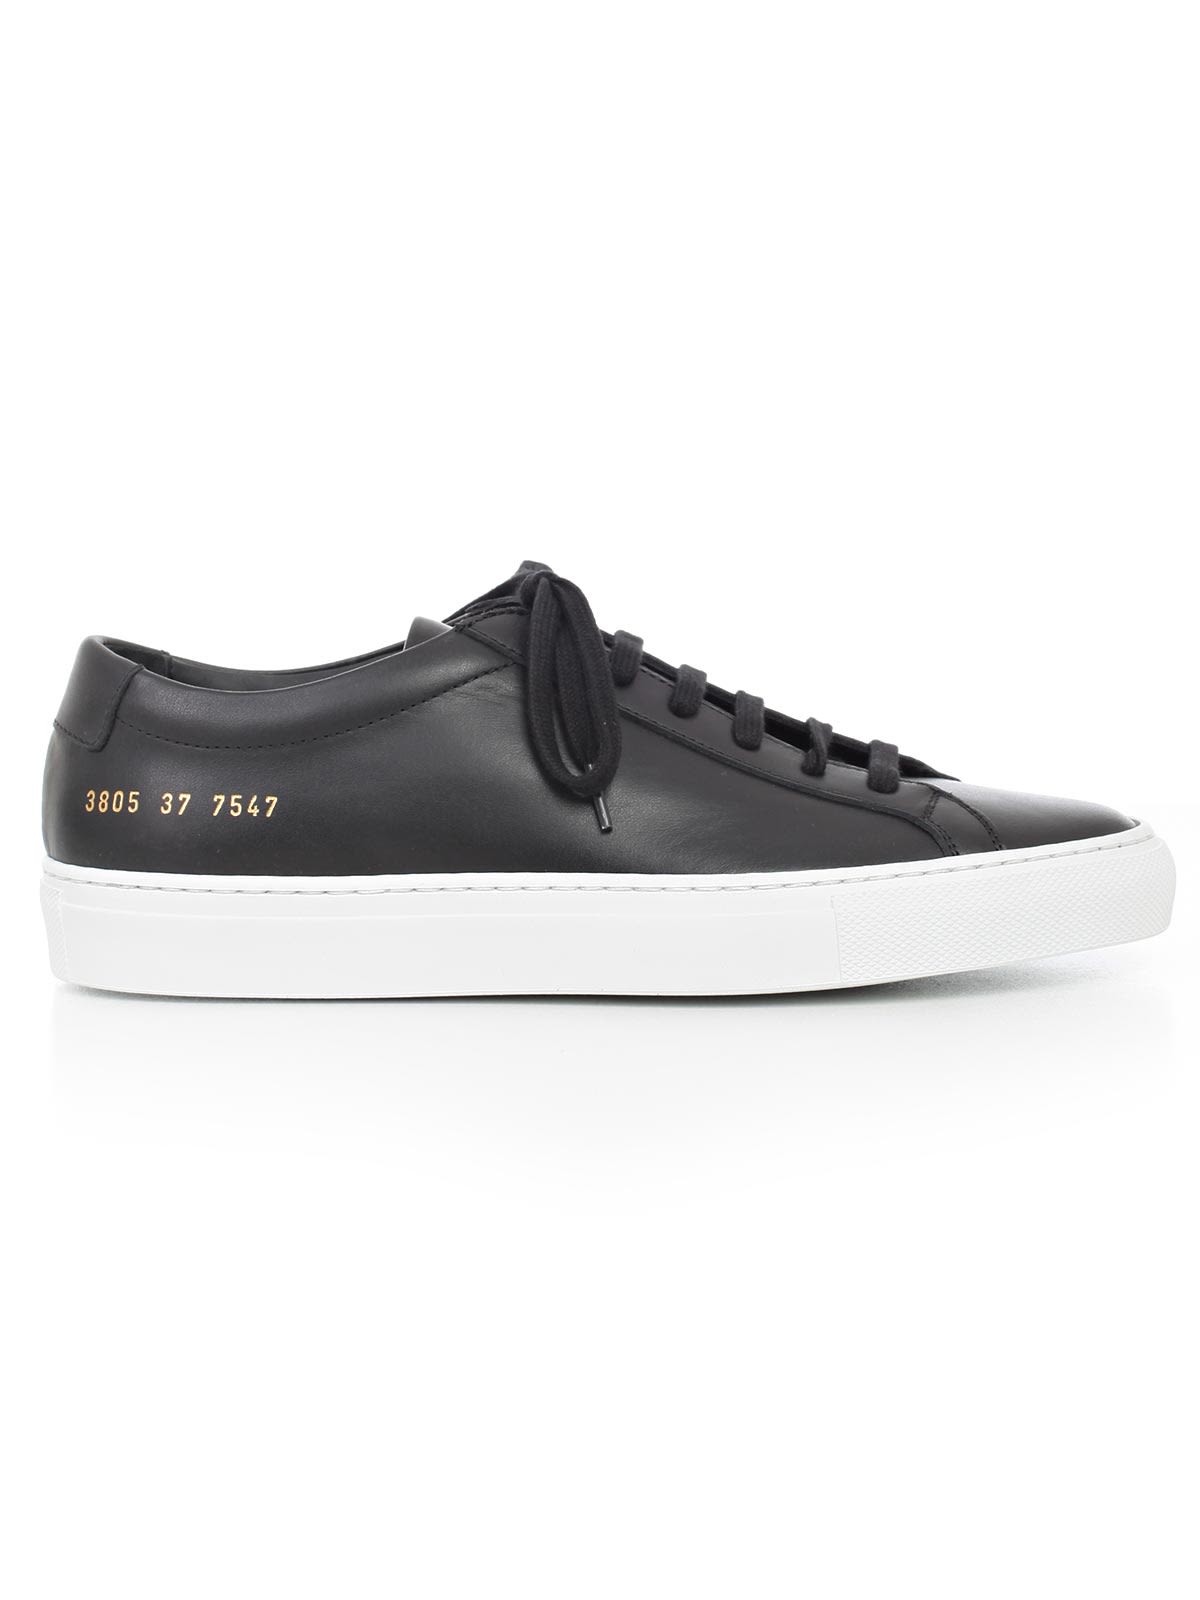 Common Projects - Common Projects Sneakers - Black, Women's Sneakers ...